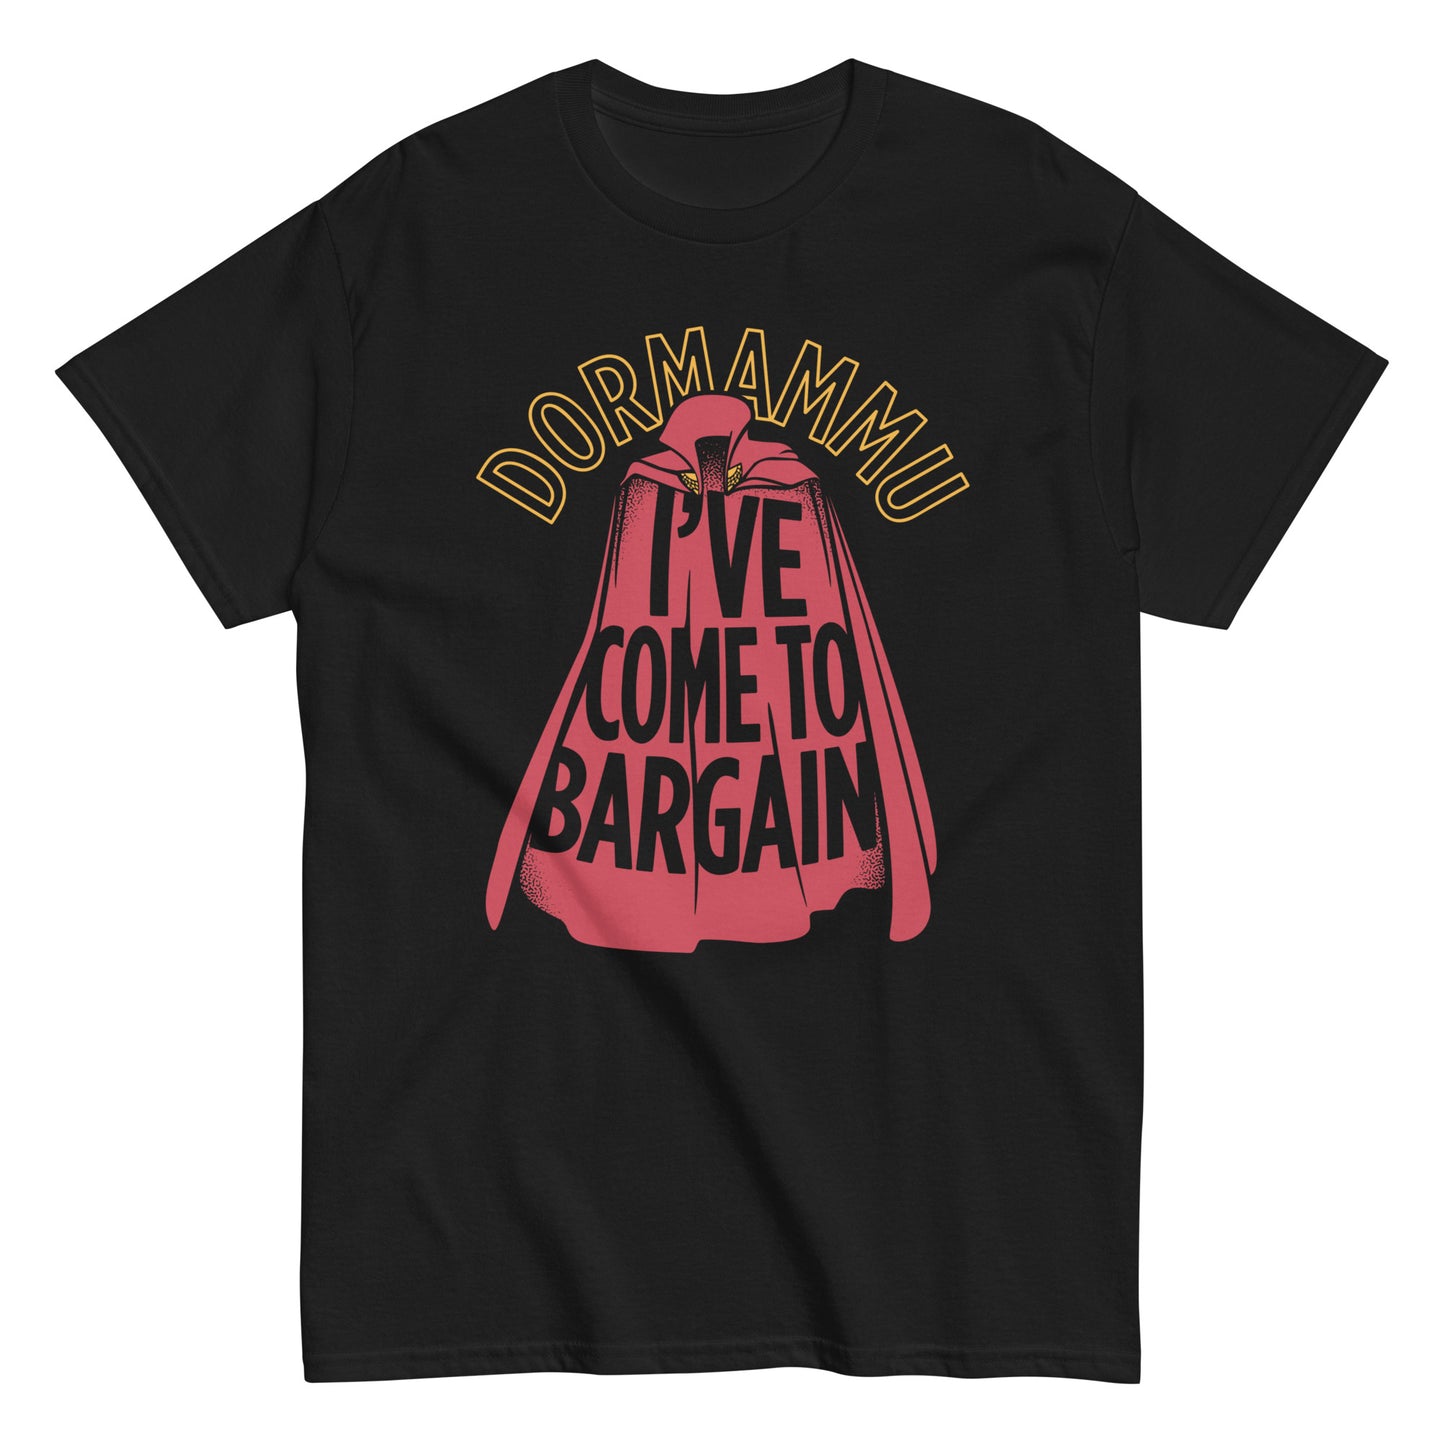 I've Come To Bargain Men's Classic Tee